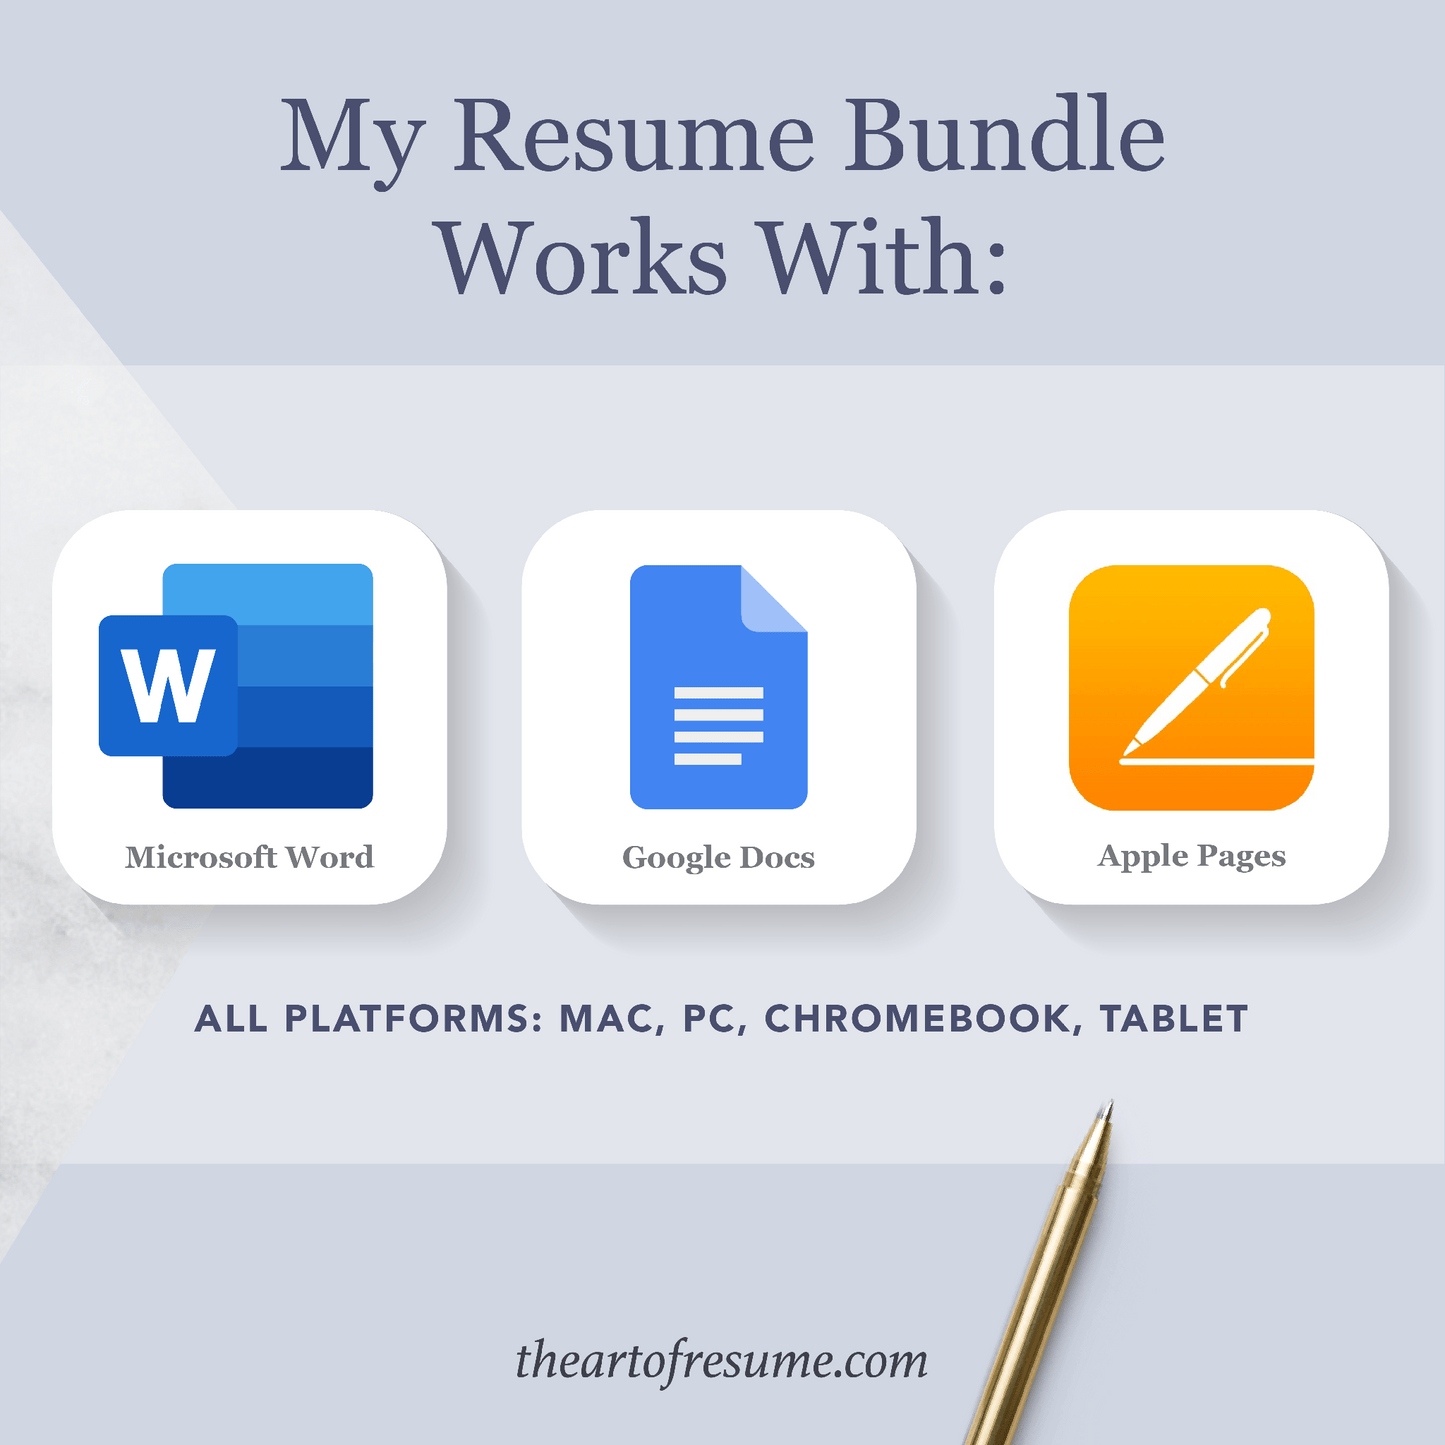 The Art of Resume | Templates compatible with Microsoft Word, Apple Pages, Google Docs, Mac, PC, Google Chromebook, Tablet